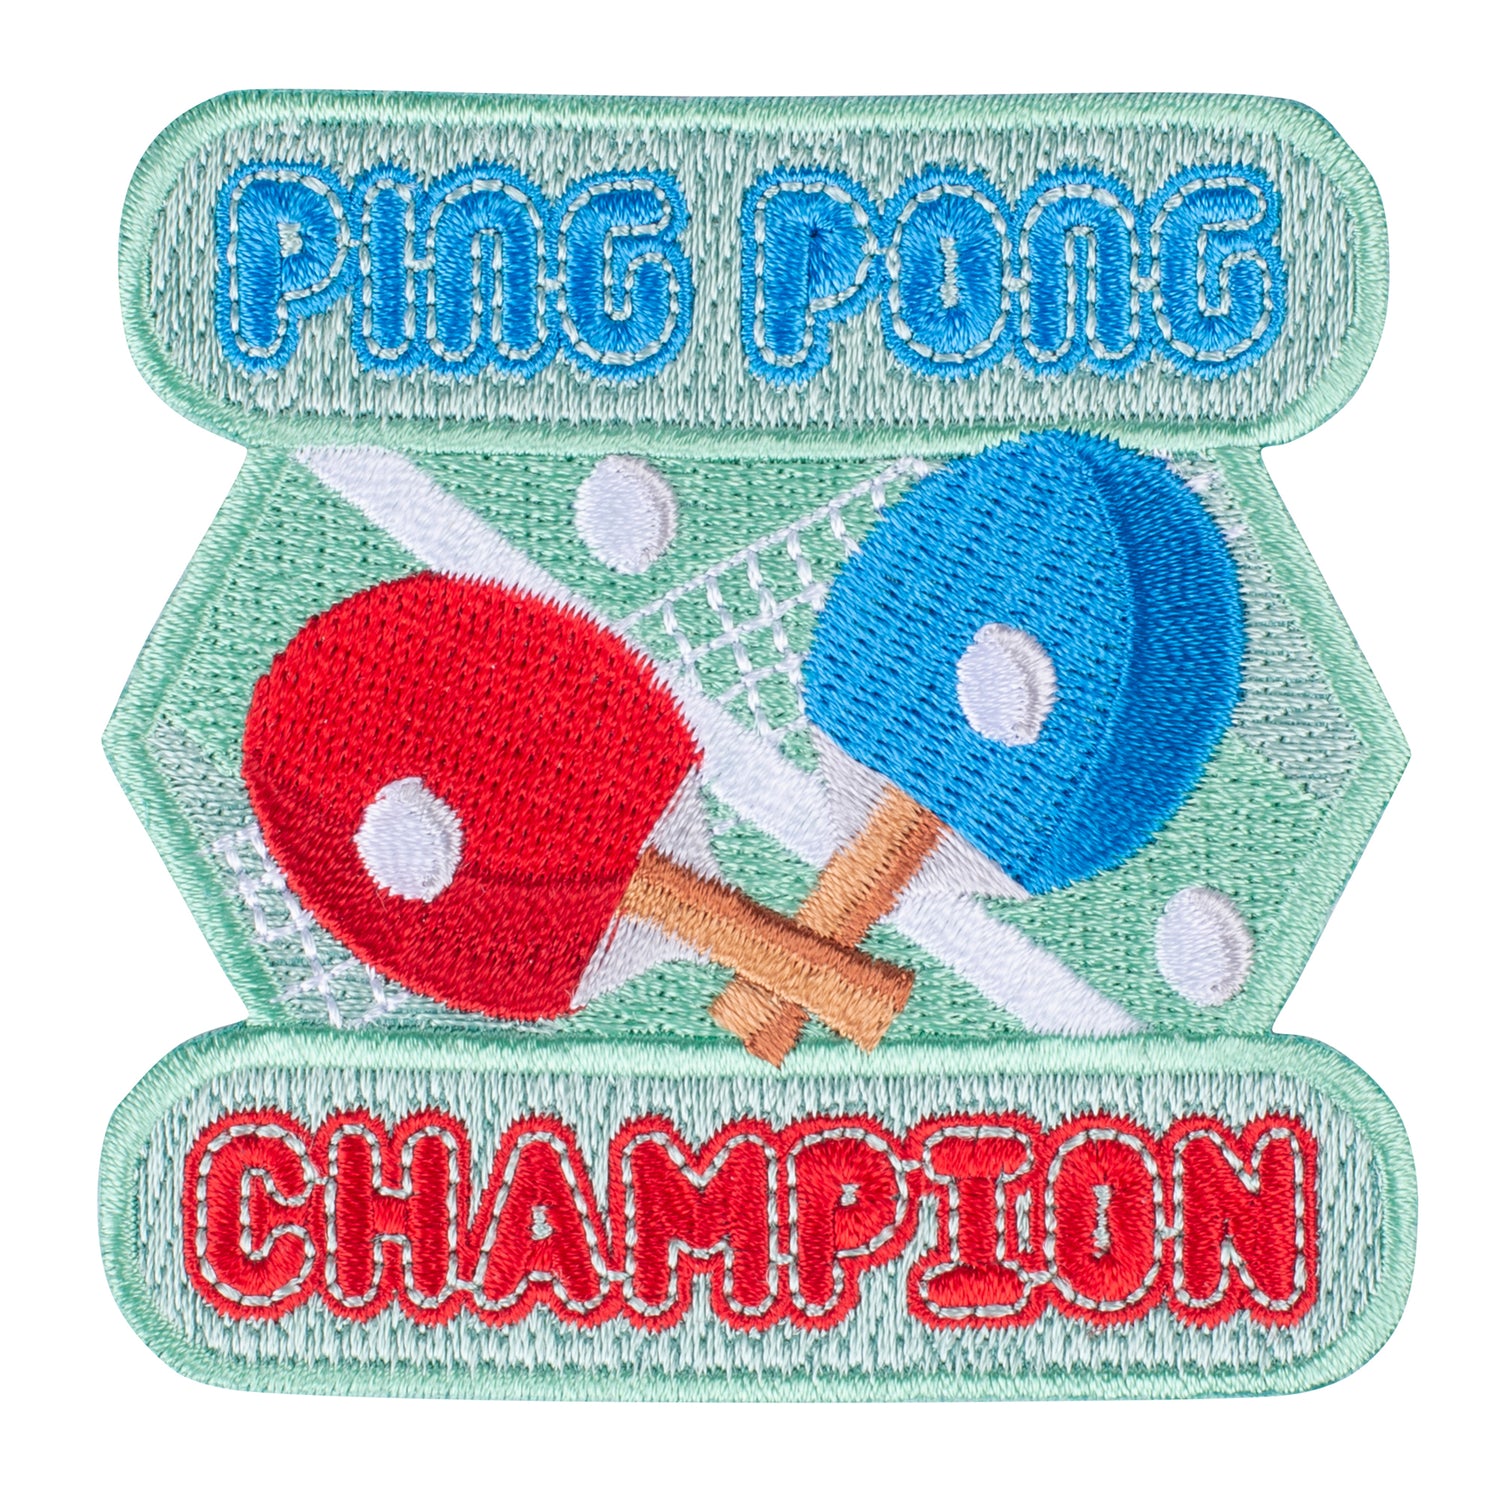 Ping Pong Champion Patch